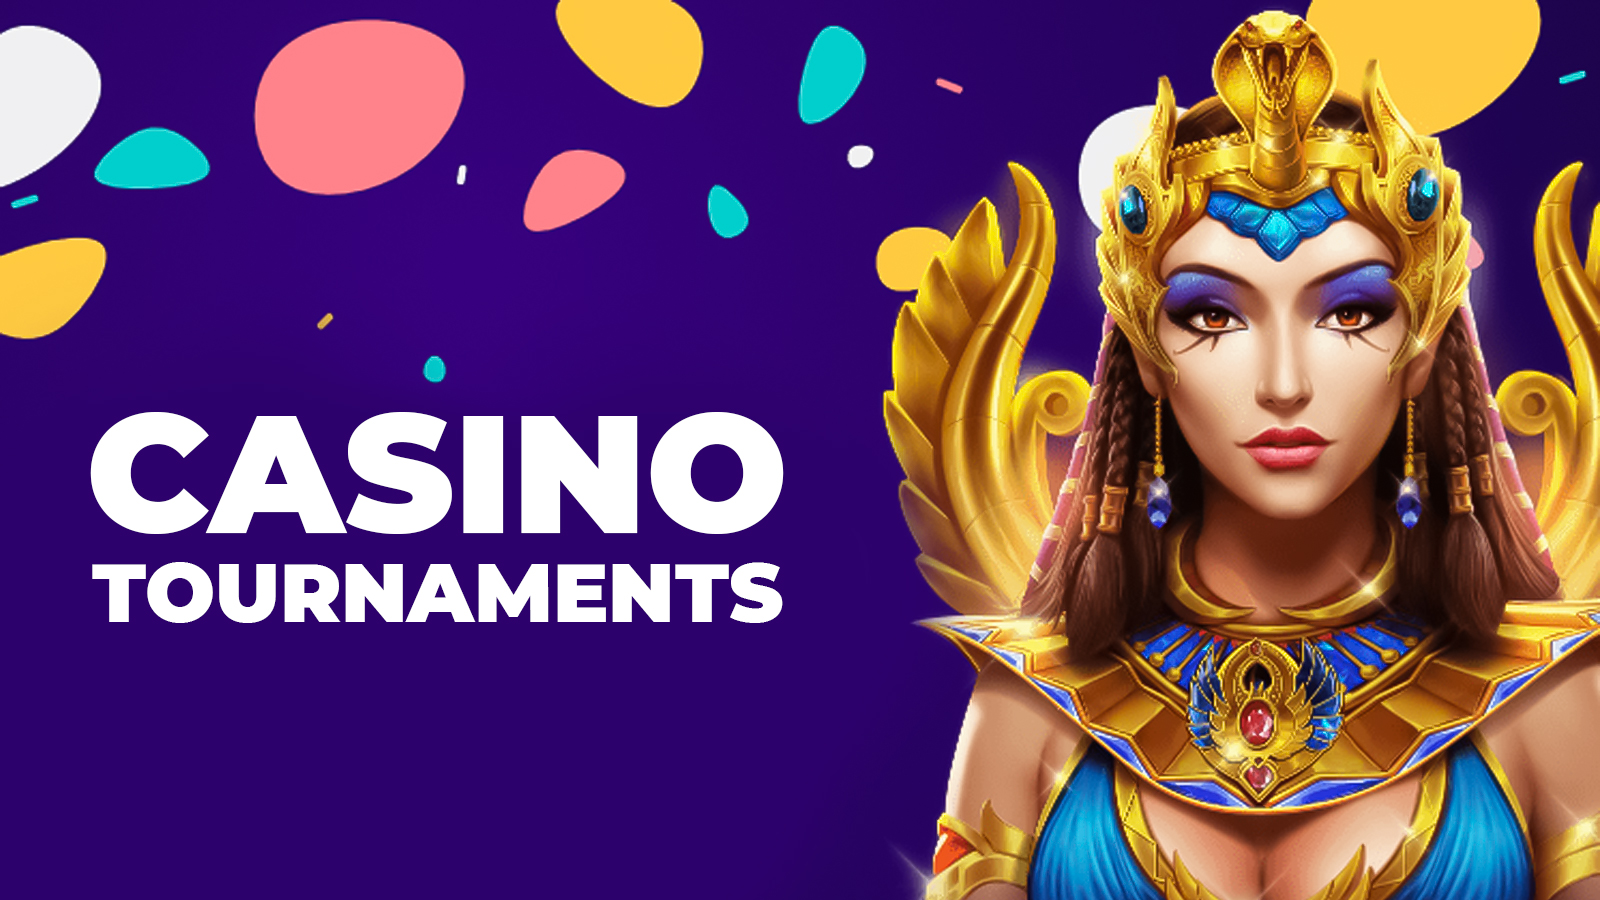 Take part in Casumo tournaments and compete with other players in online slots.